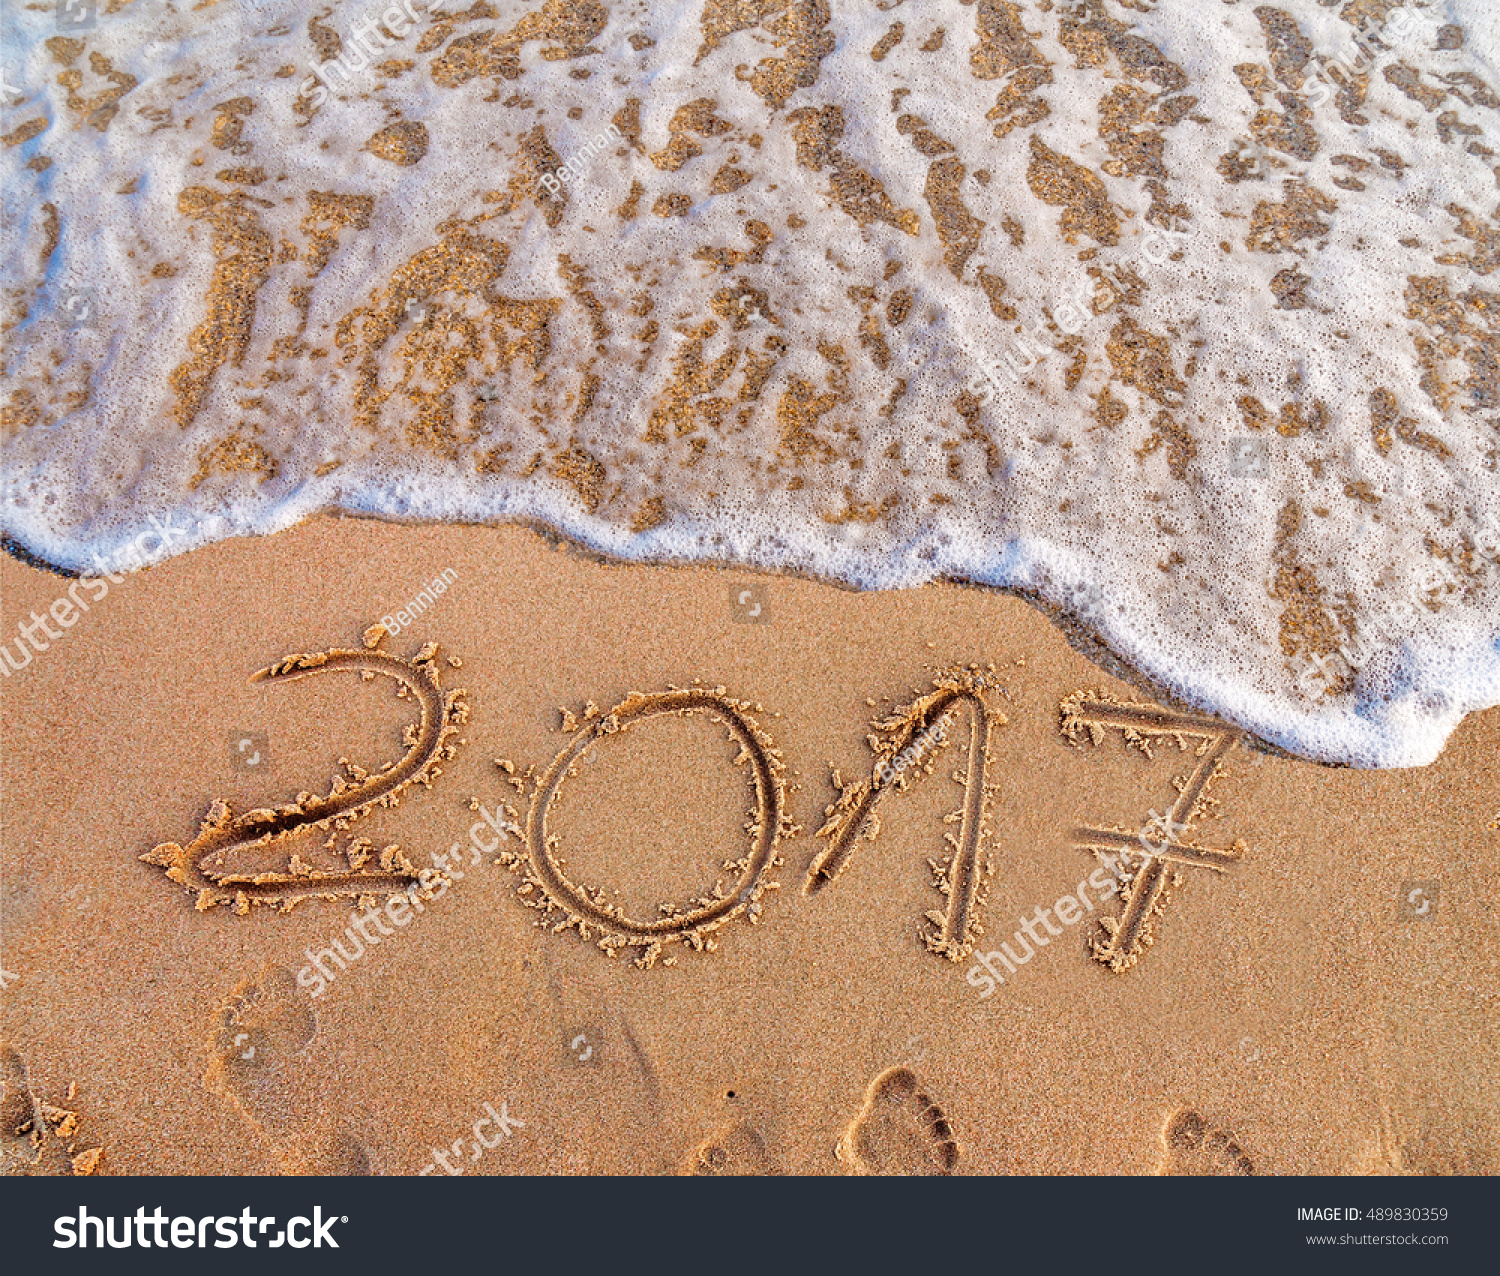 New Year 2017 is coming concept written on sandy beach  #489830359